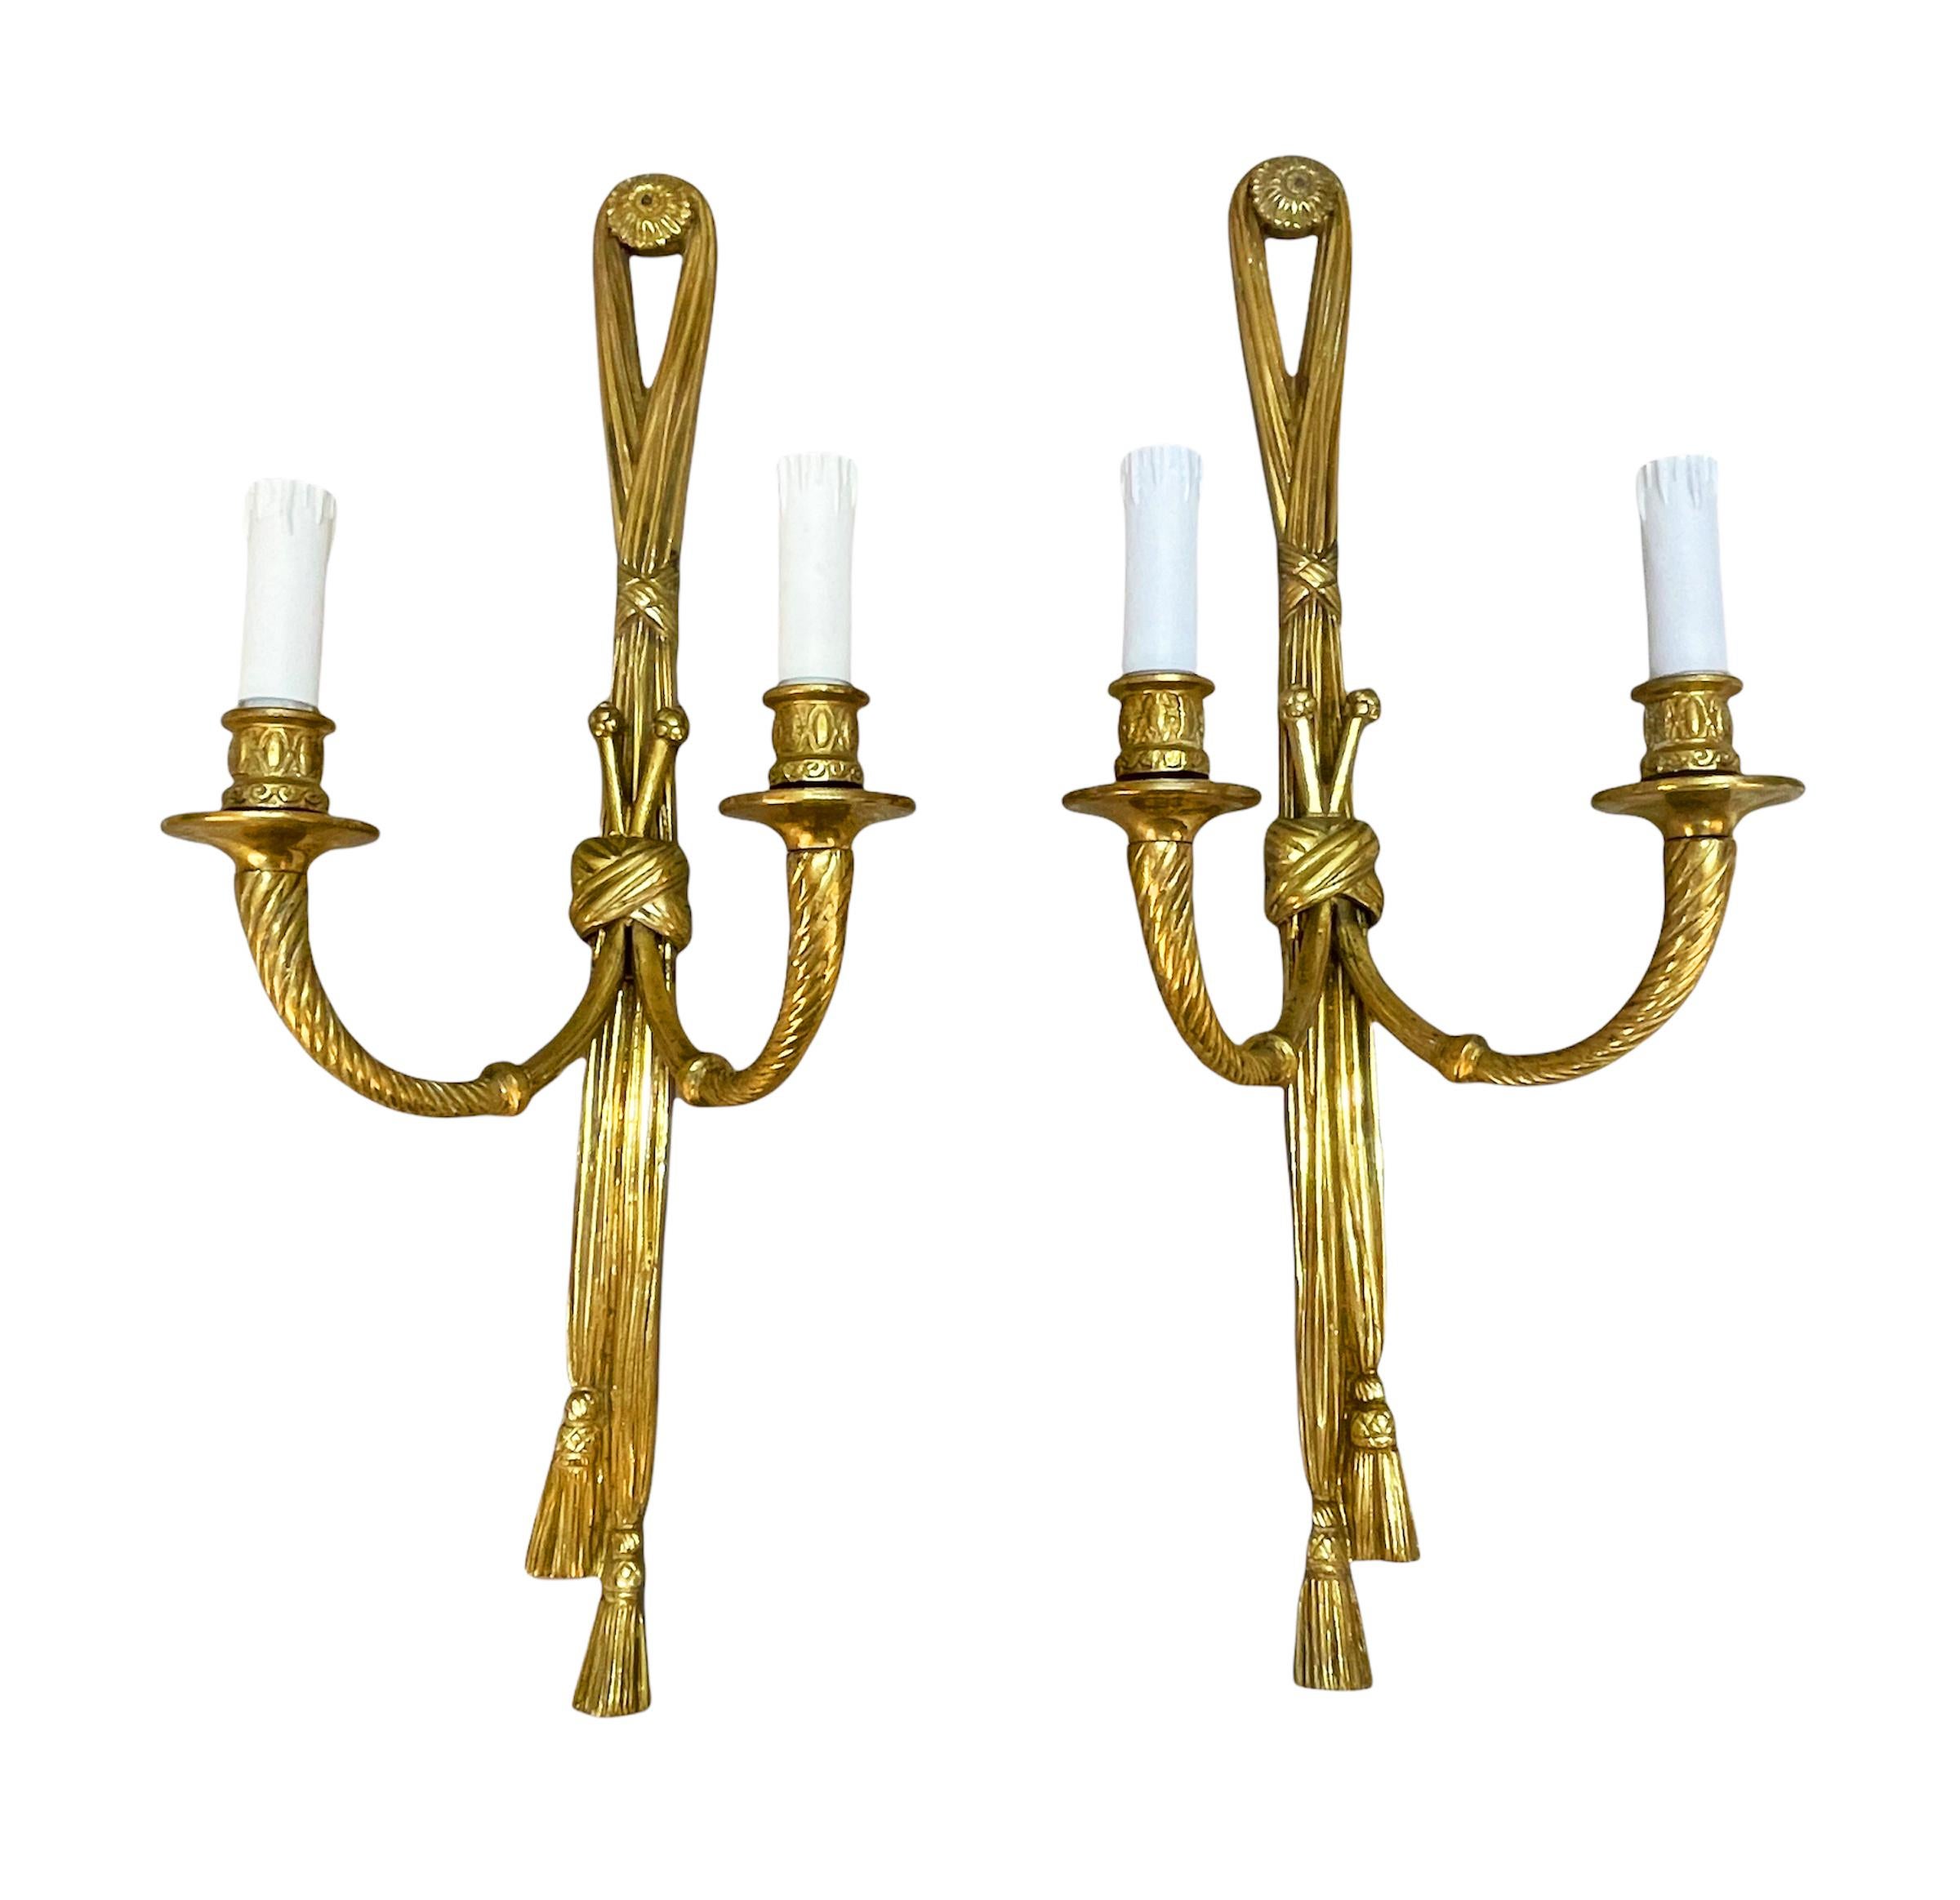 Amazing matching pair of gilt bronze sconces in the shape of knotted ribbons holding two candle arms. These amazing set were produced in the 19th-century in France.

Both remarkable pieces are ending in tassels, draped over buttons decorated with